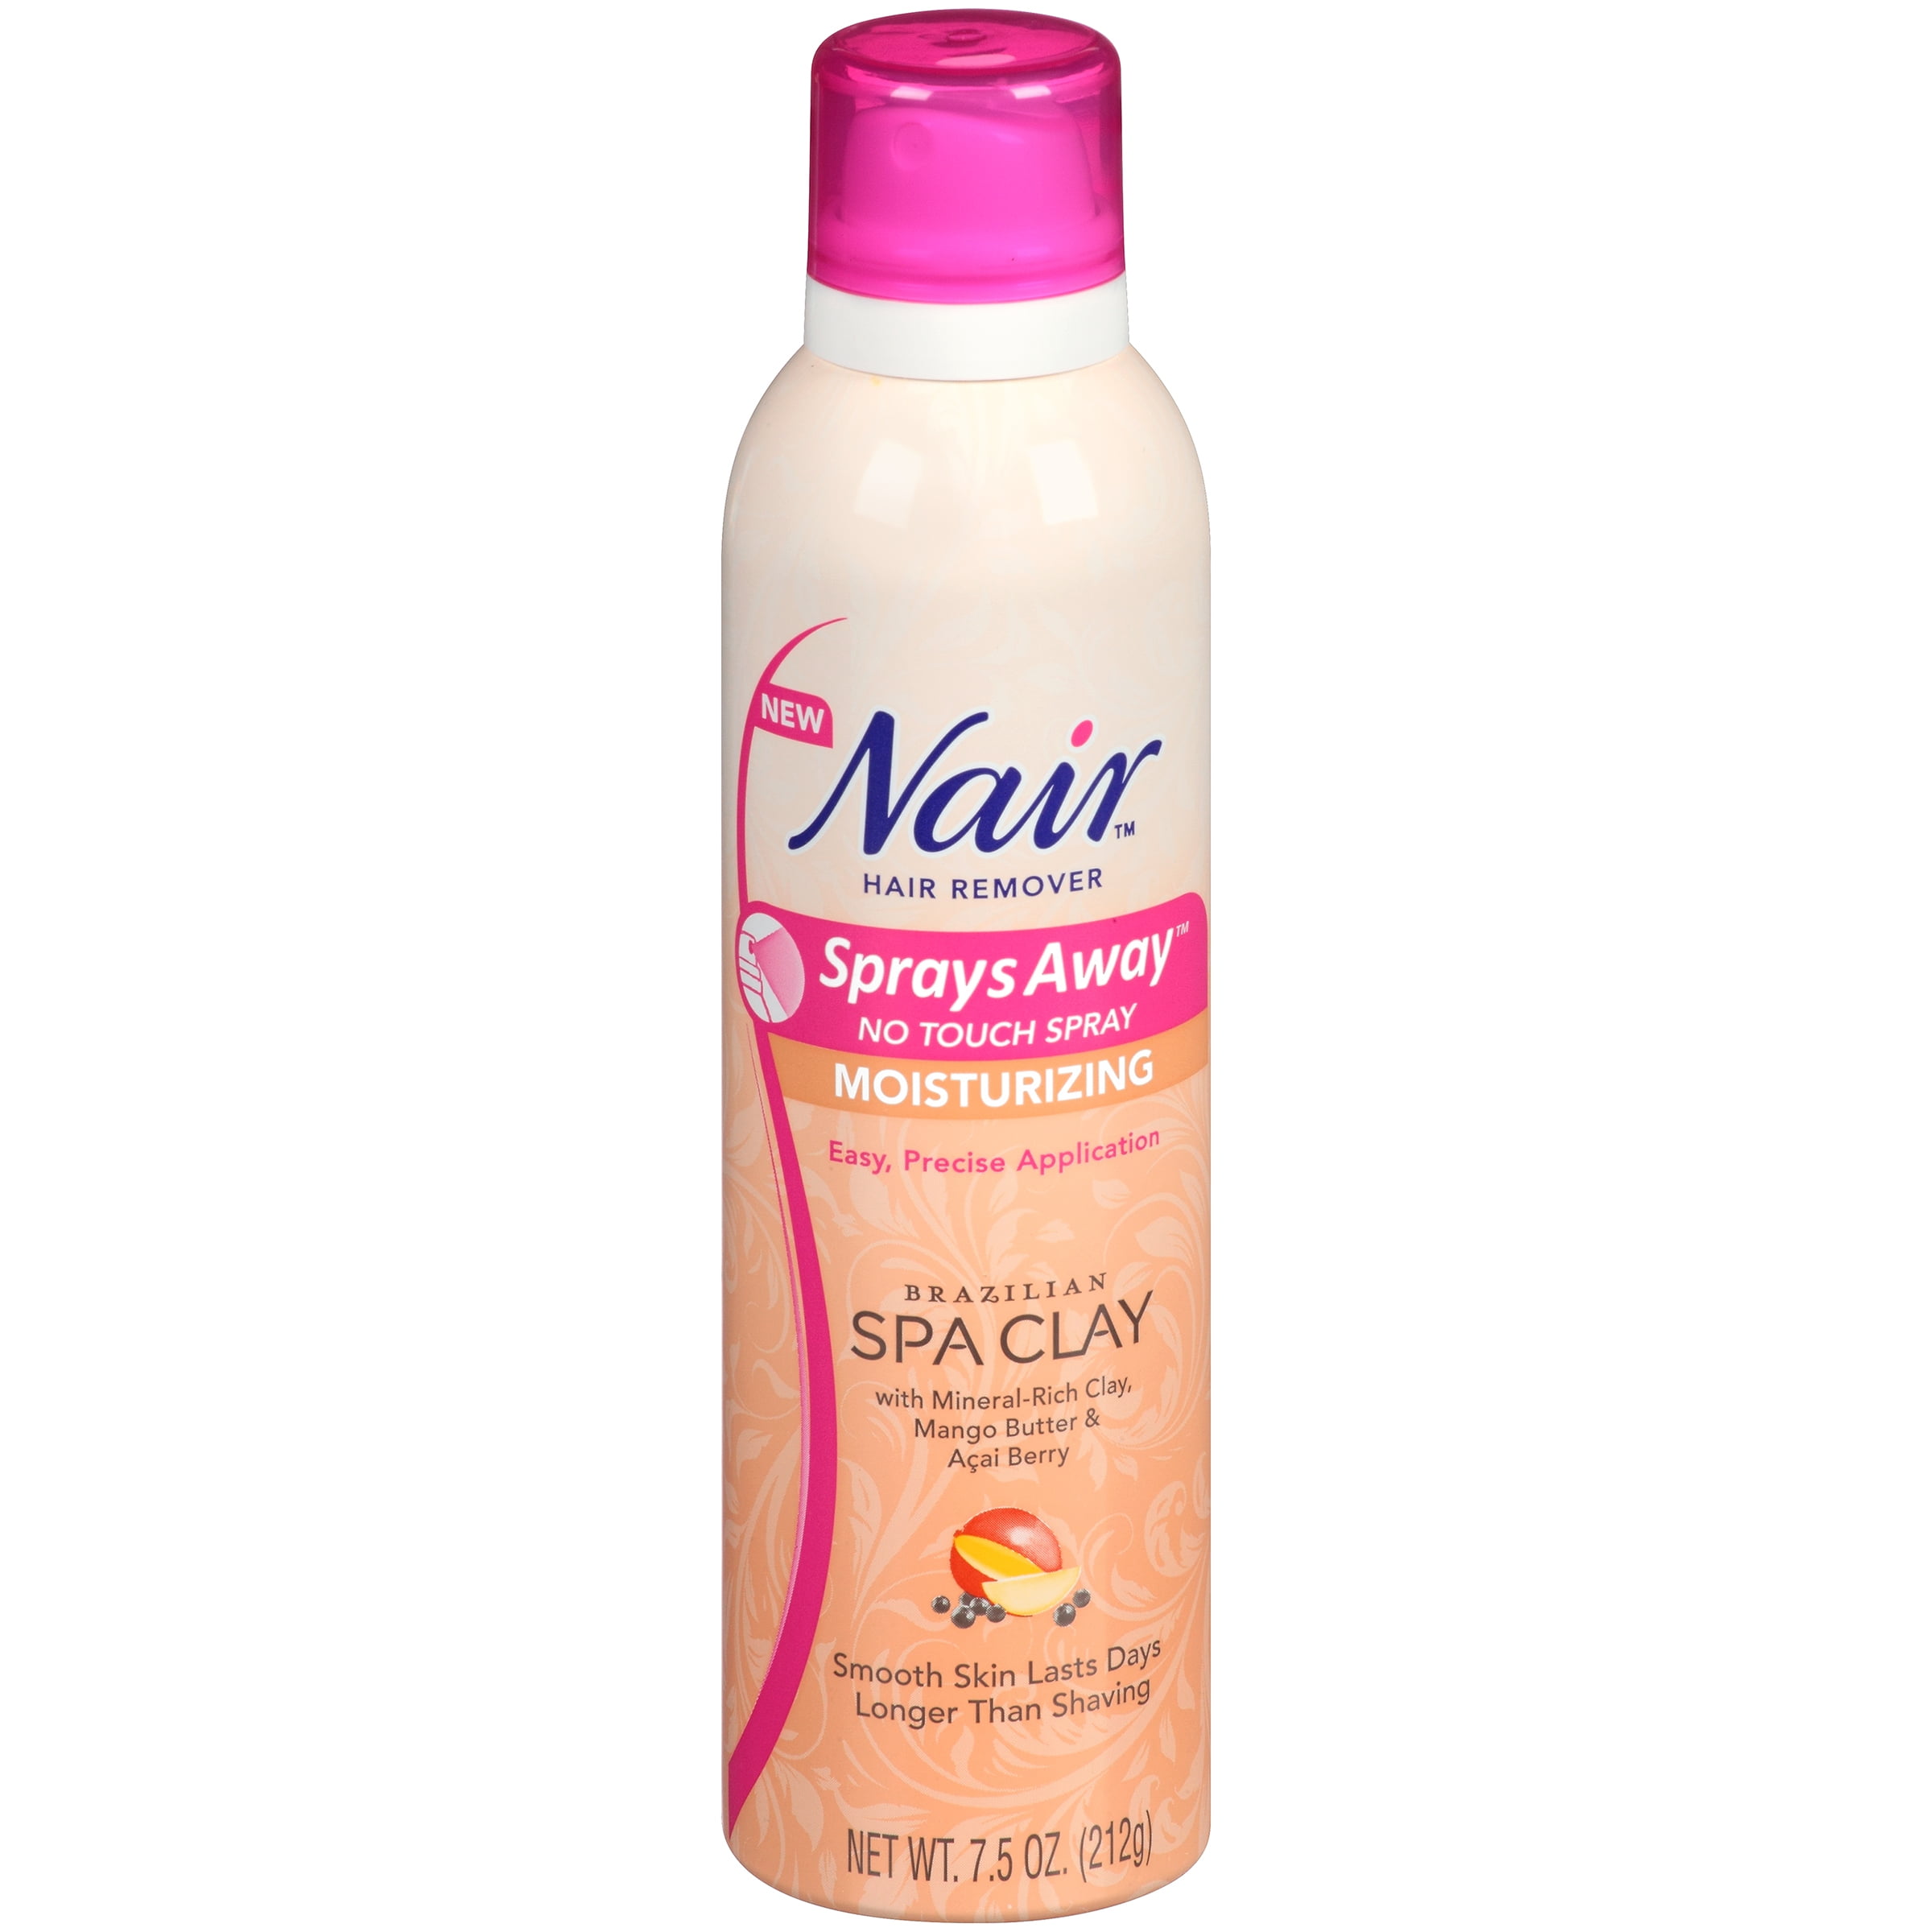 Photo 1 of 4 PACK Nair Hair Remover Sprays Away Bundle: Nourish Legs Body with Japanese Cherry Blossom | 4 Count Moisturizing Spray Brazilian Spa Clay Hair Remover Mango Butter & Acai Berry 7.5 oz. Can